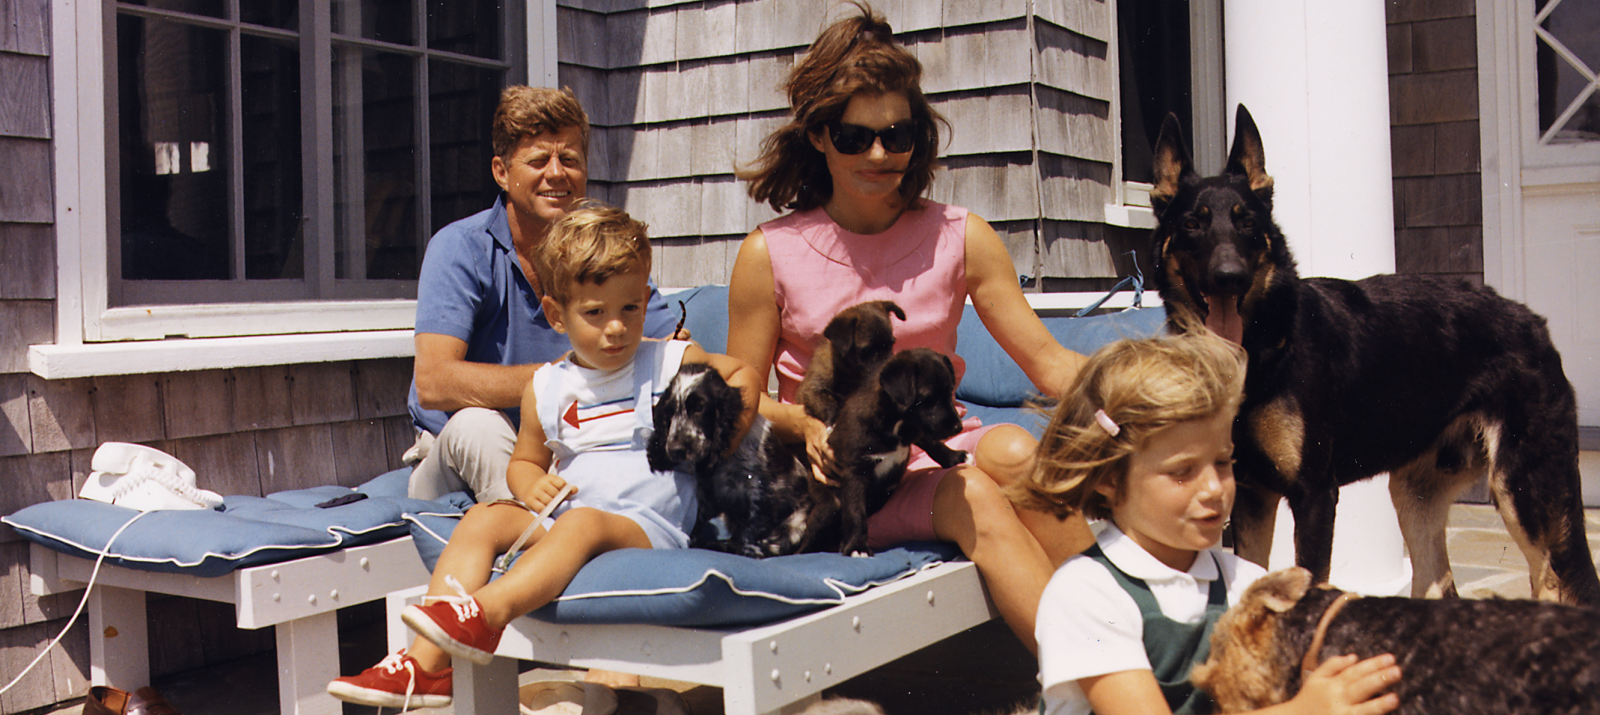 kennedy family with dogs in hyannis port, massachusetts